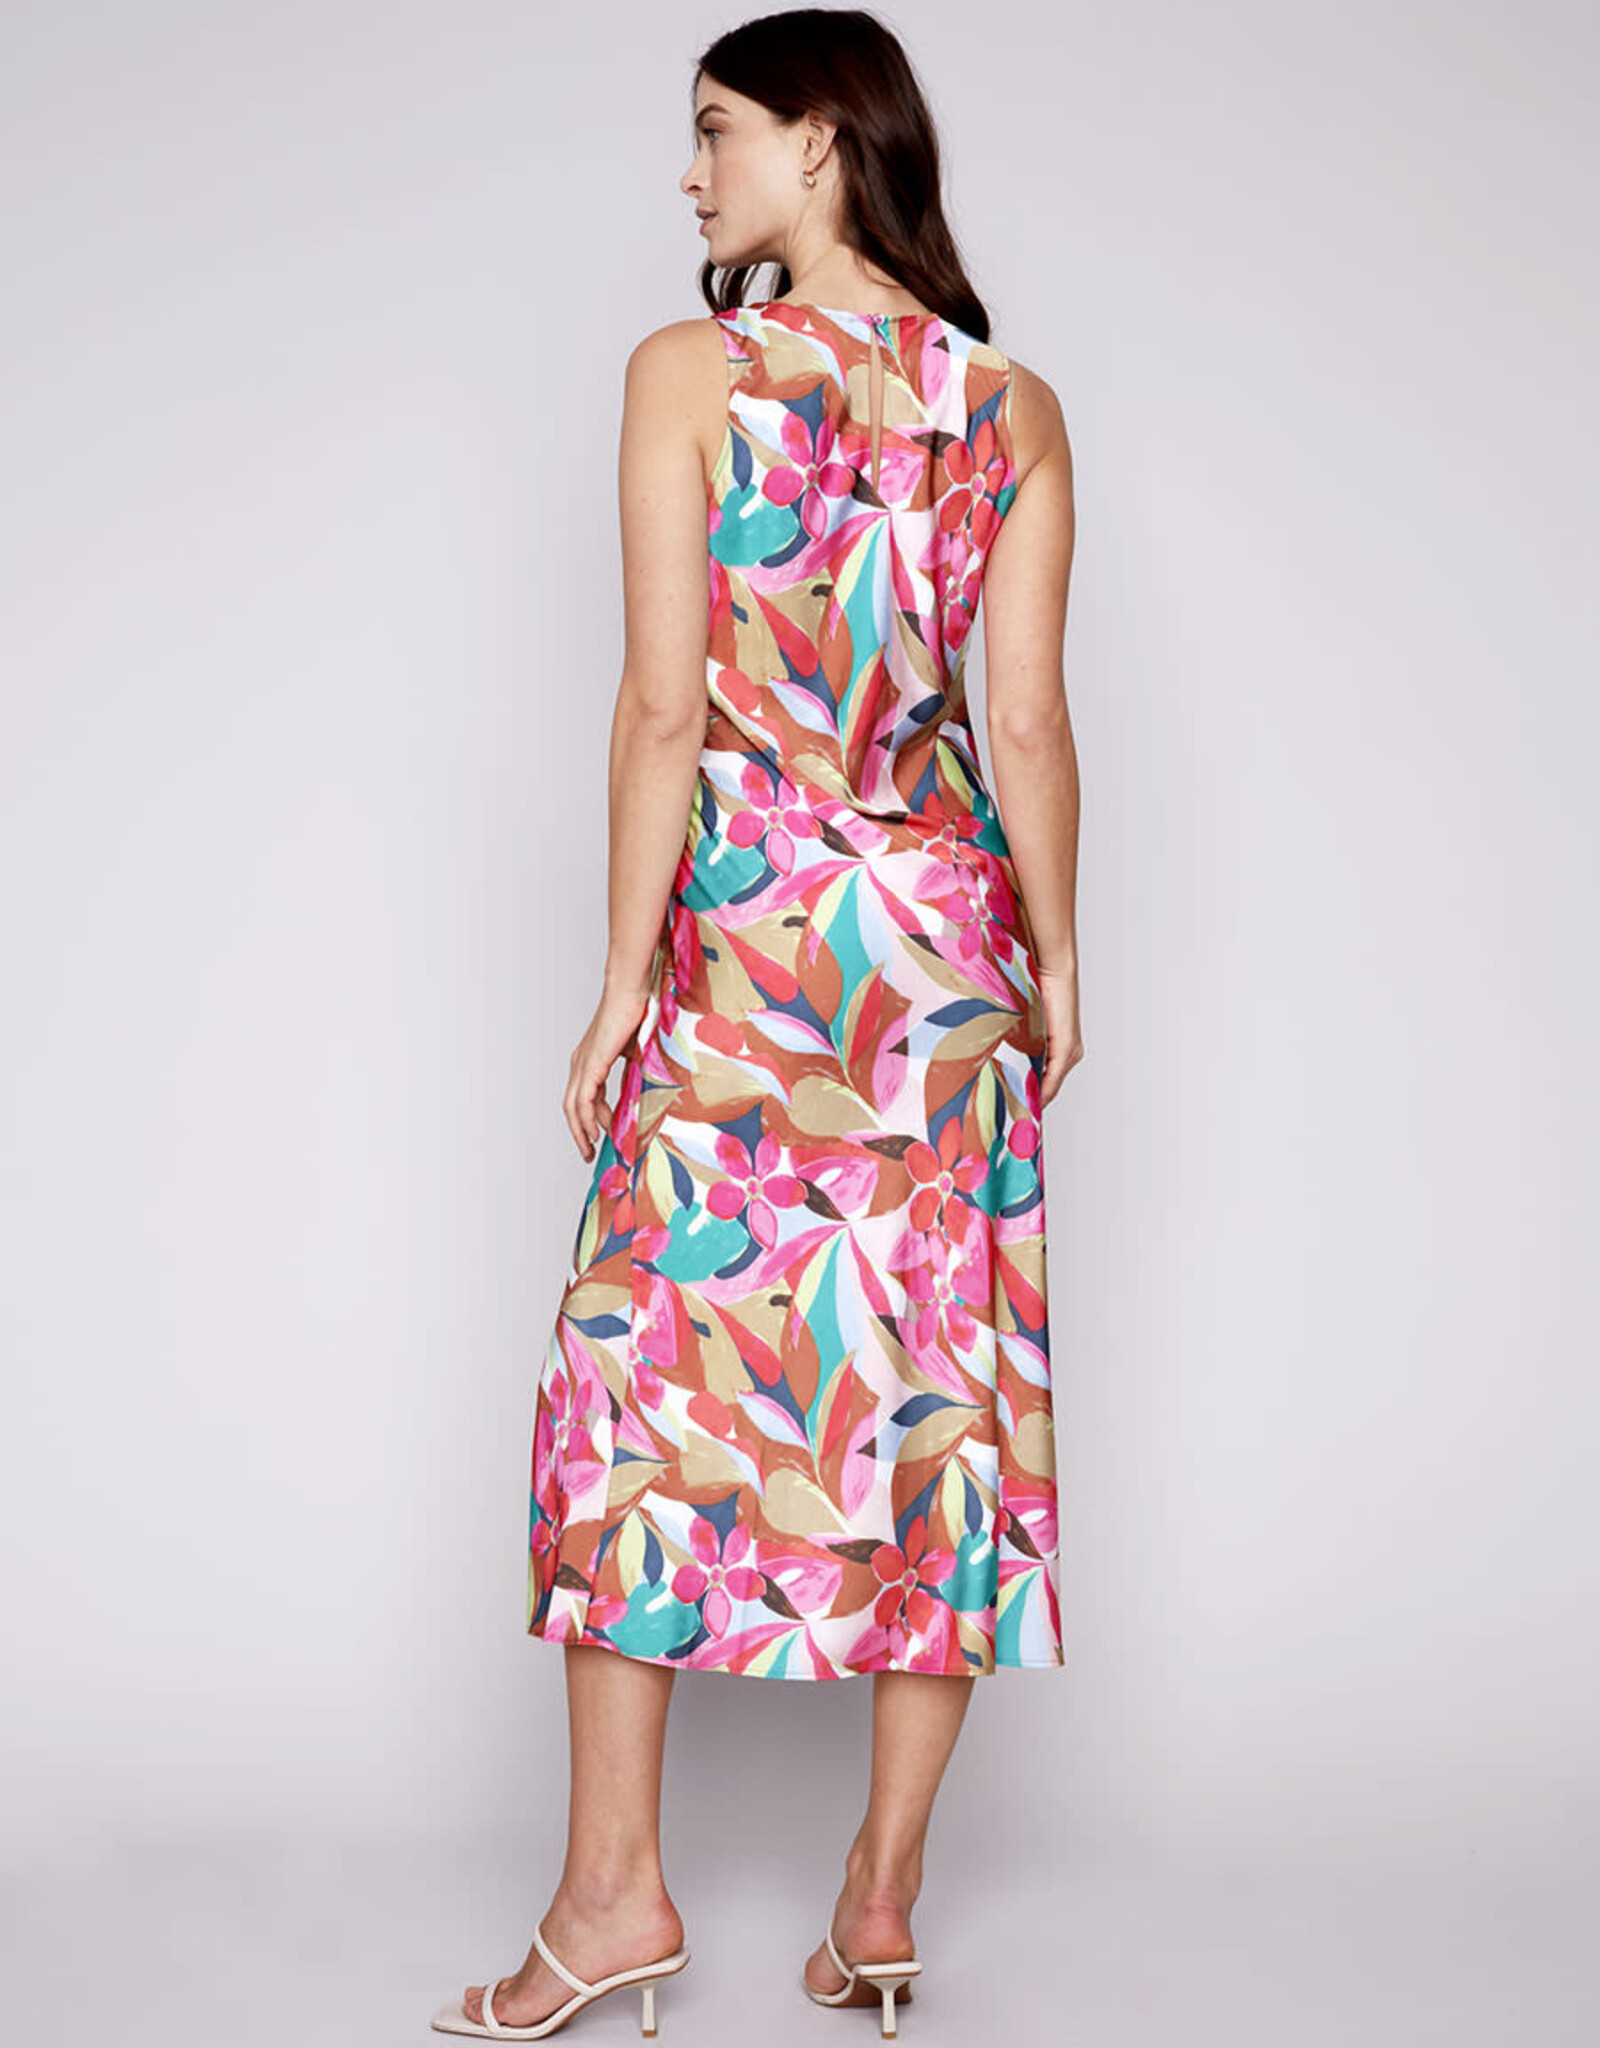 Charlie B Pink Colorful Floral Sleeveless Maxi Dress w/Side Slit & Rushed Drawstring